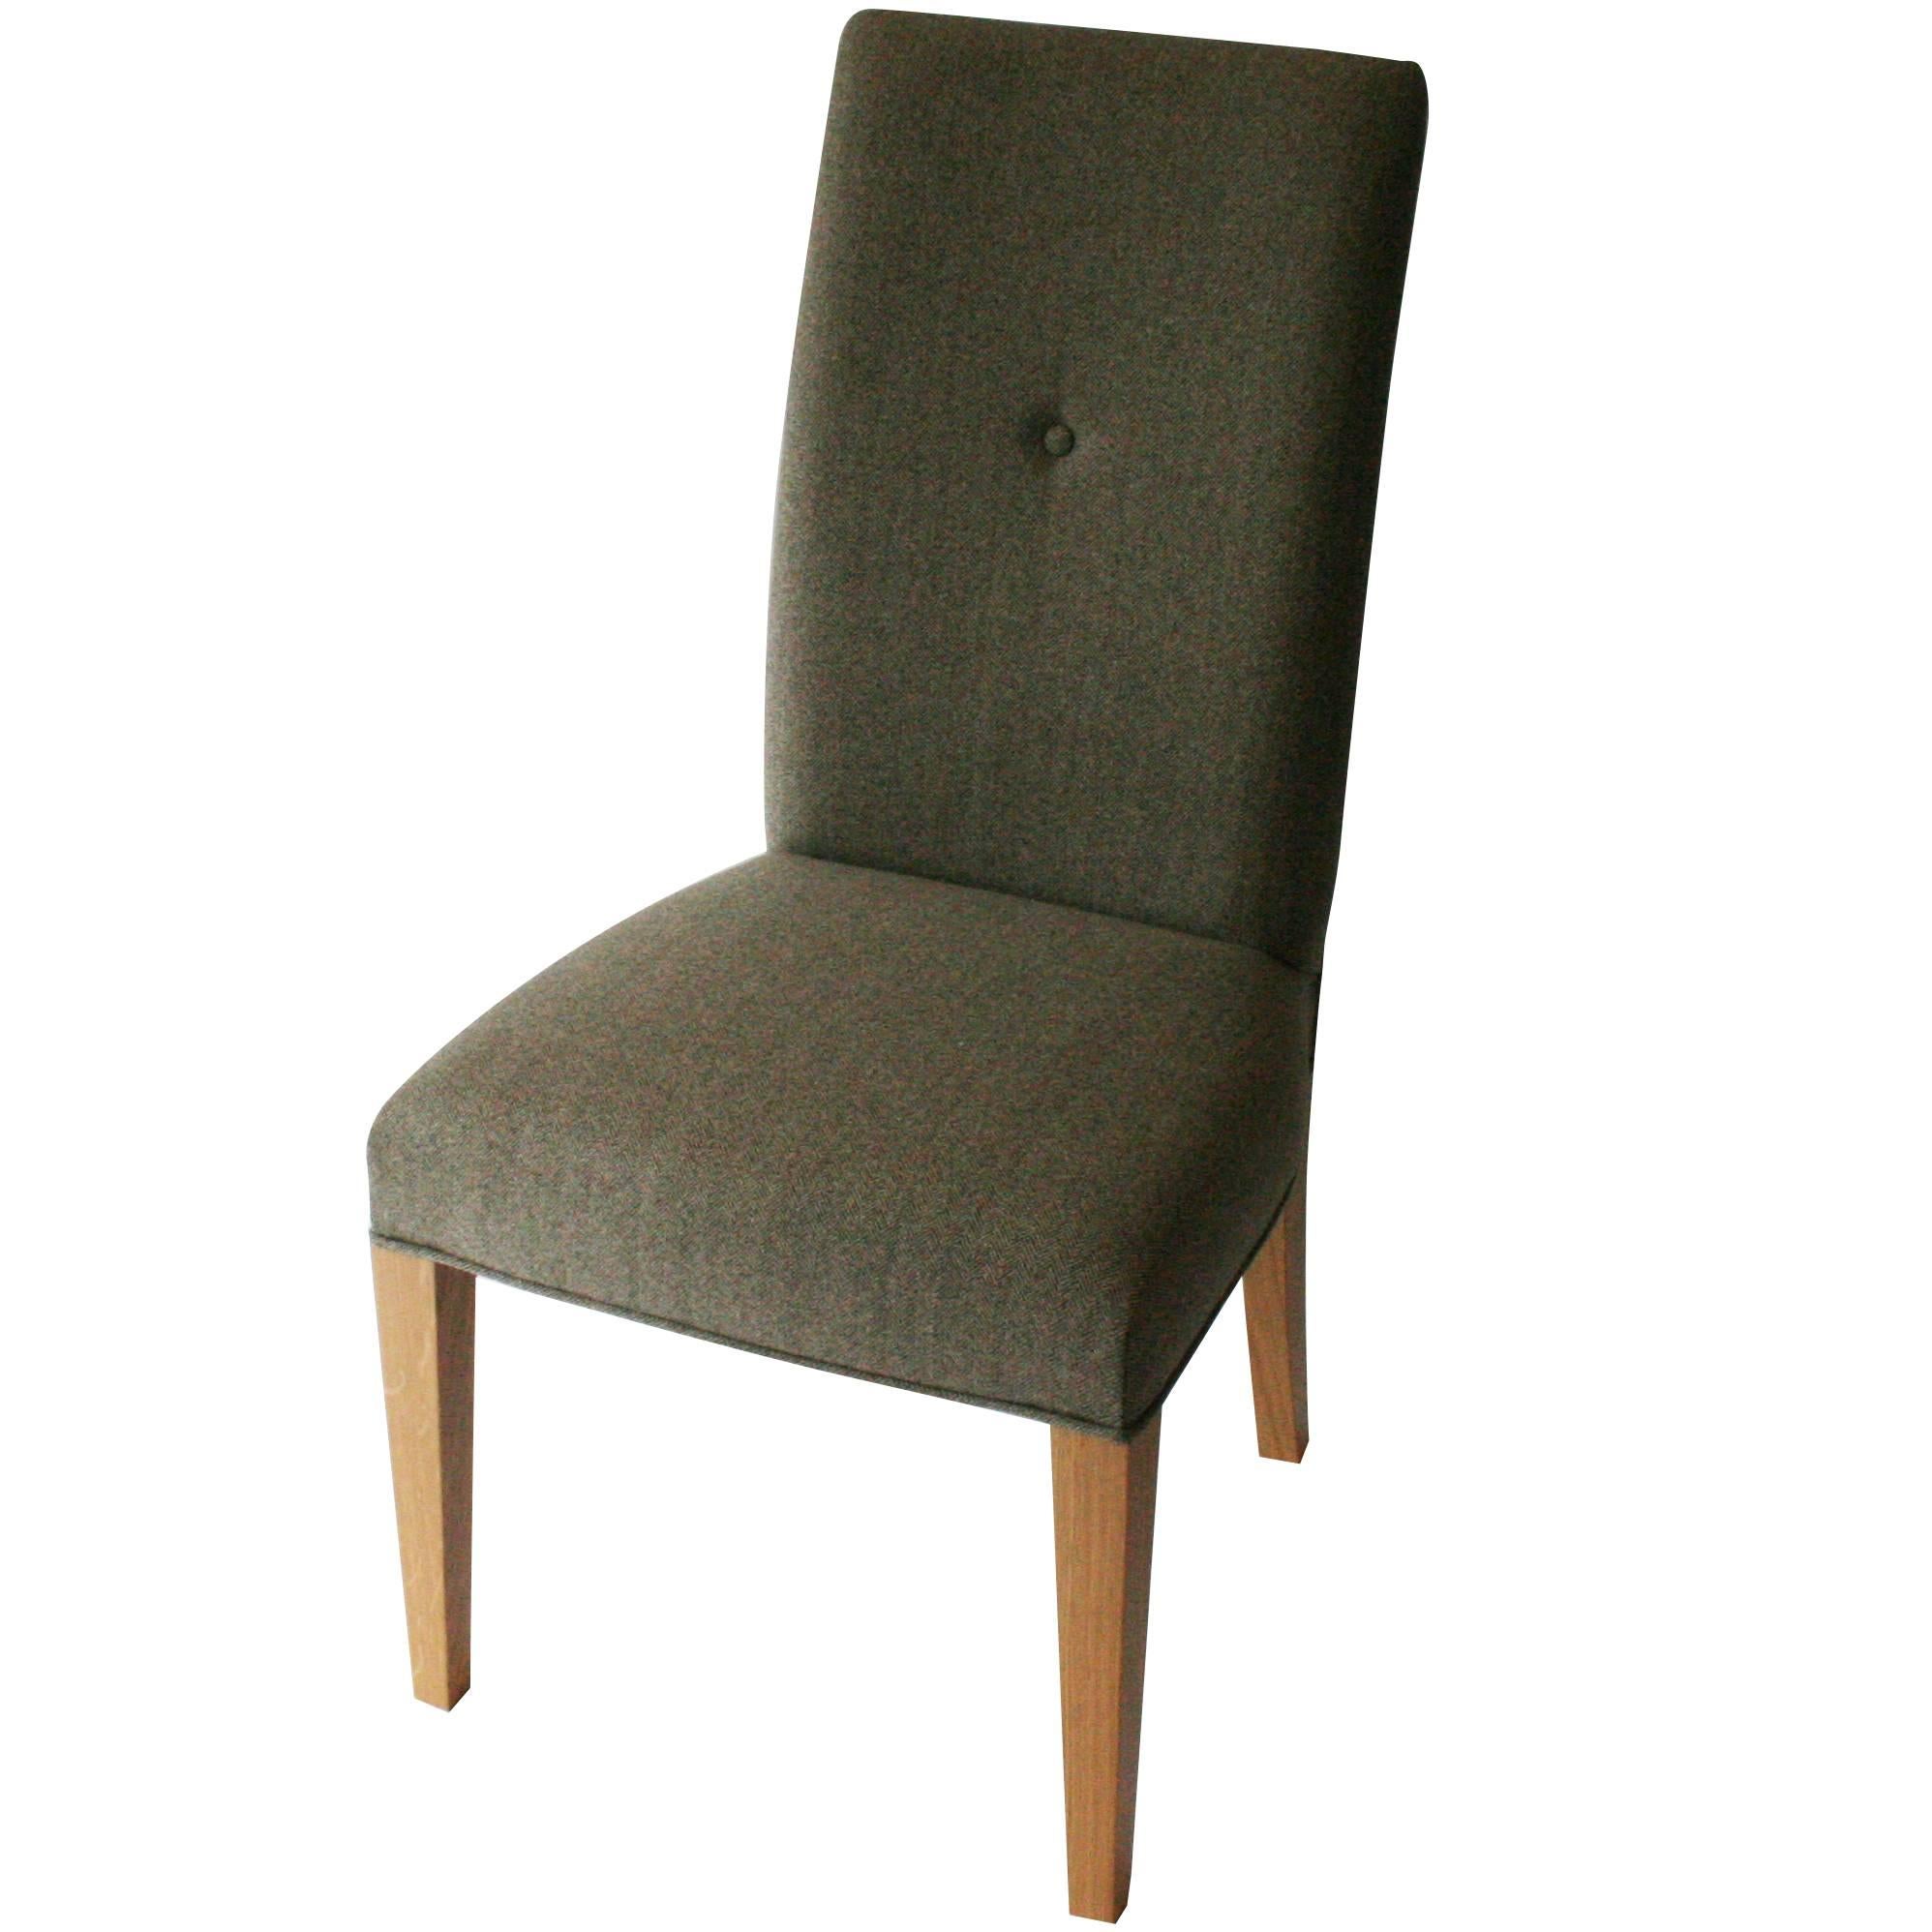 Gosling Classic Dining Chair with Oak Frame and Upholstery details For Sale